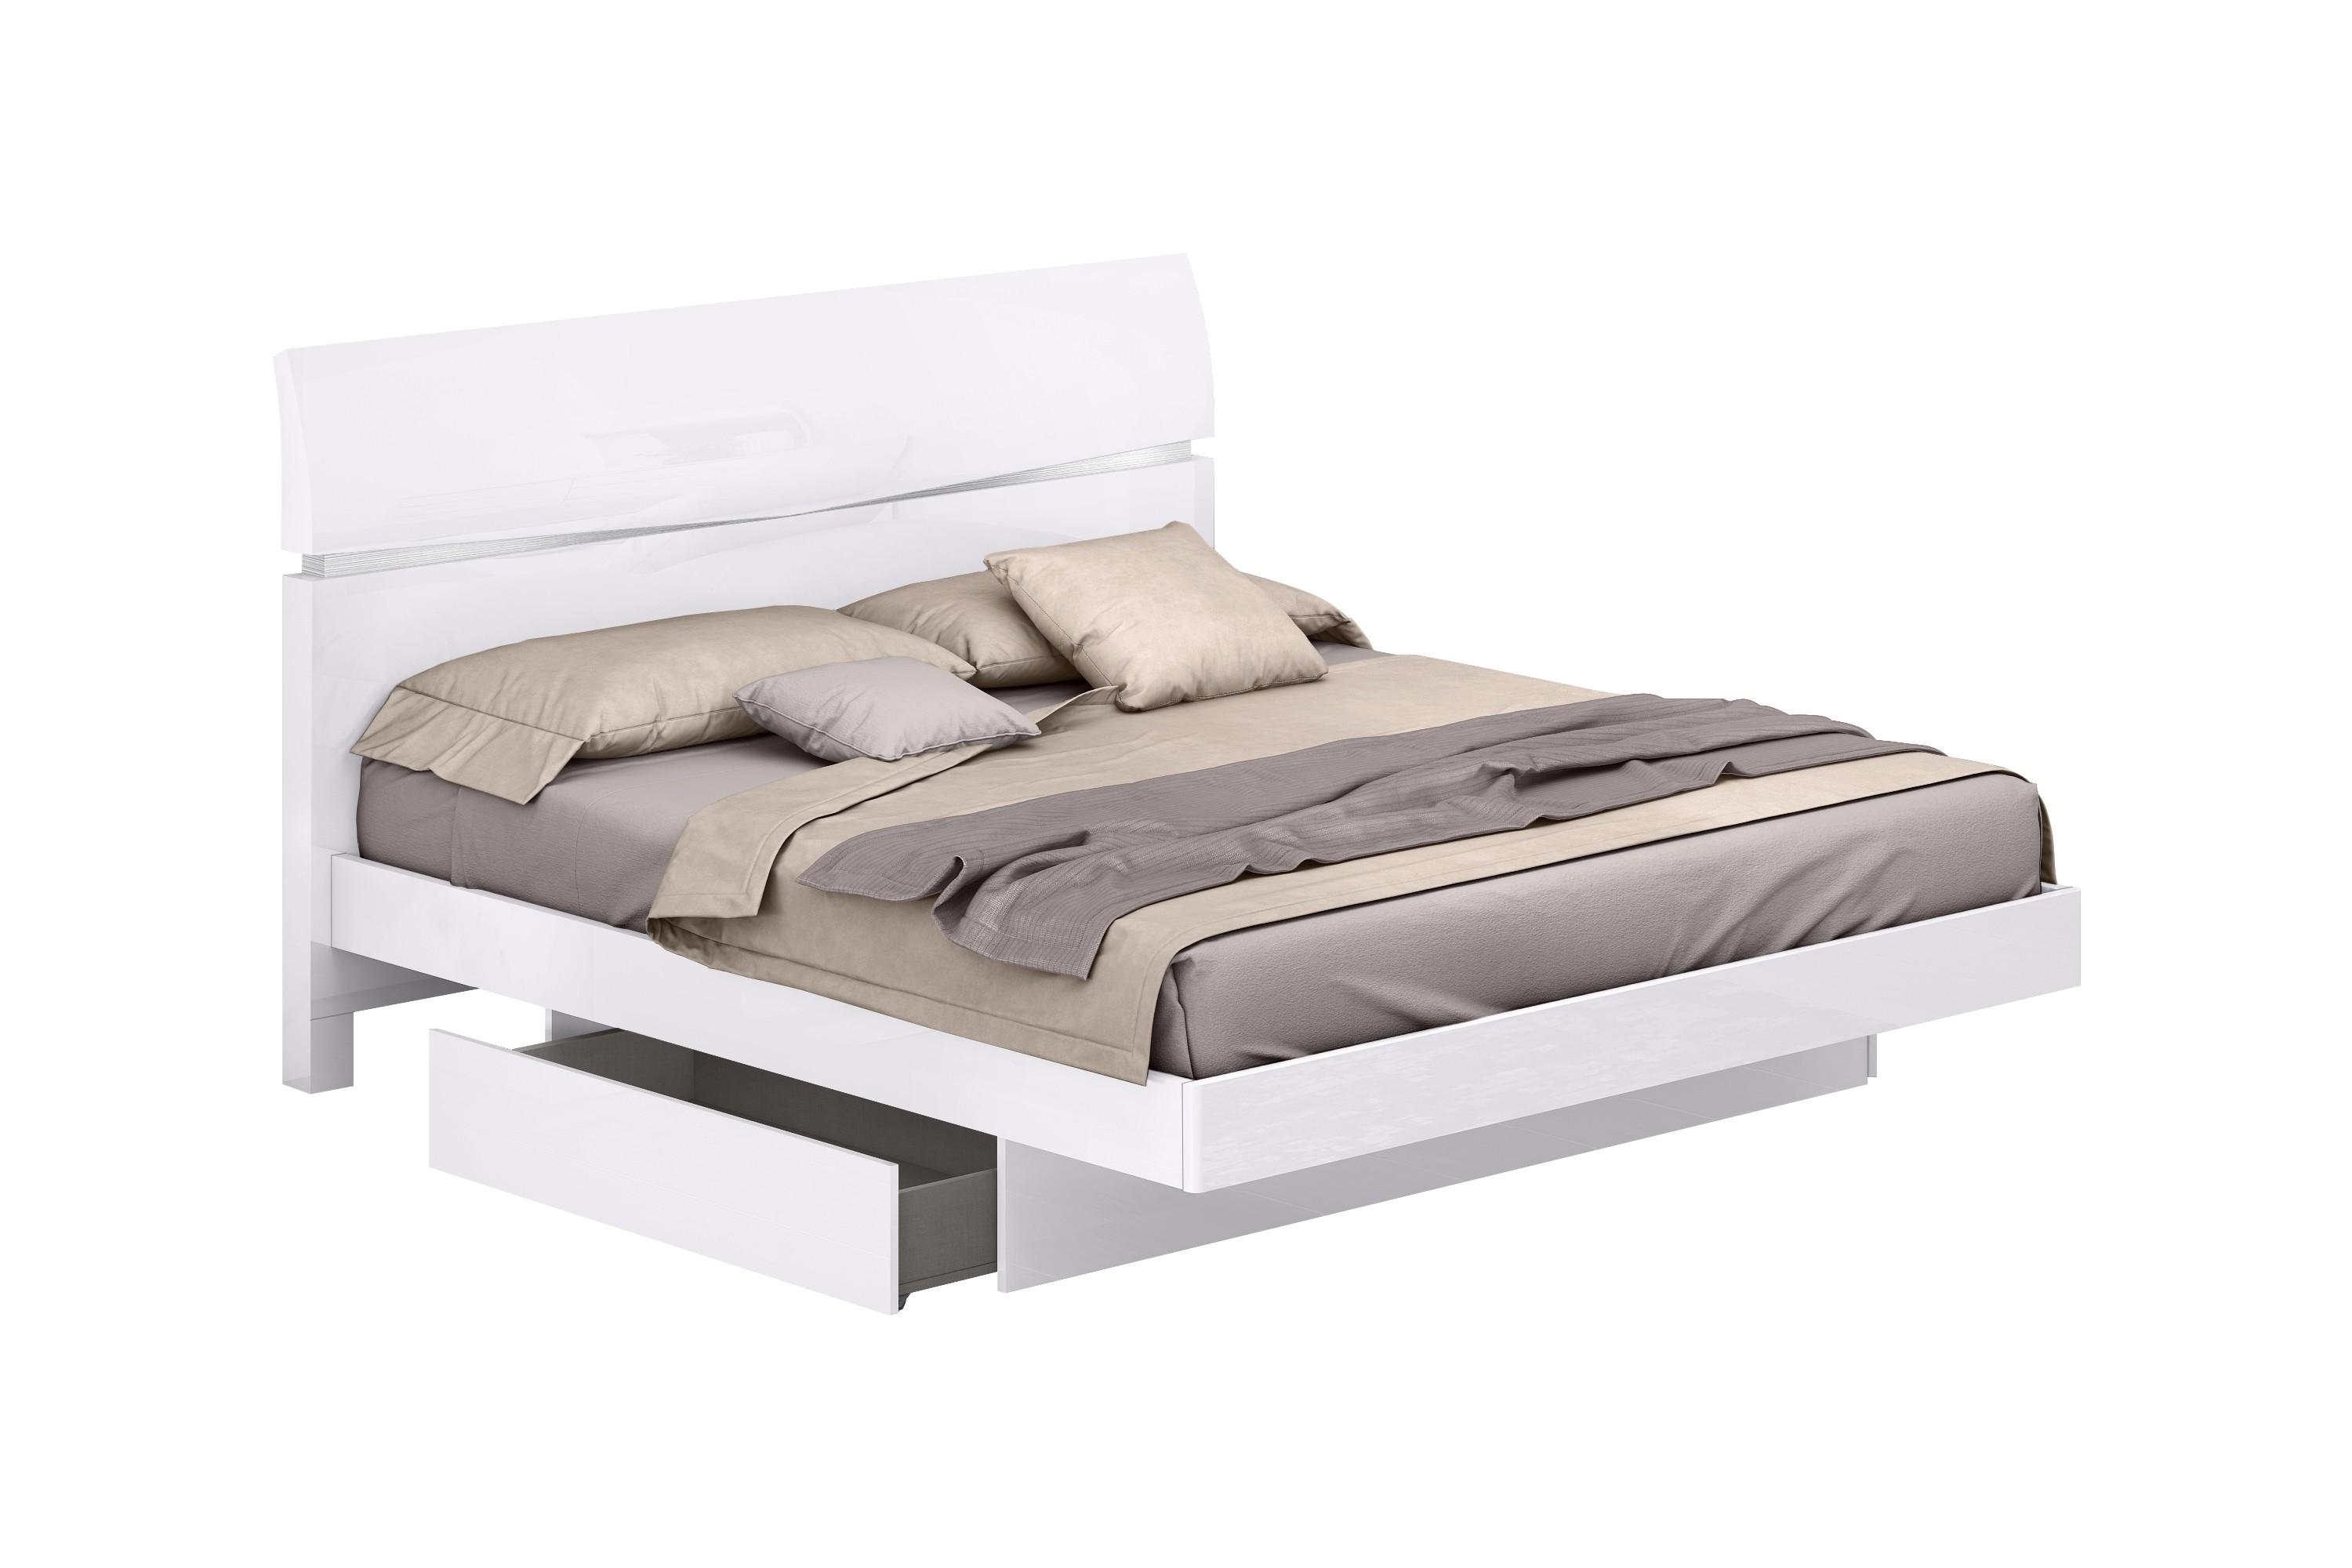 Contemporary, Modern Platform Bed Wynn WYNN-BED-WHITE-Q in White, Silver Lacquer